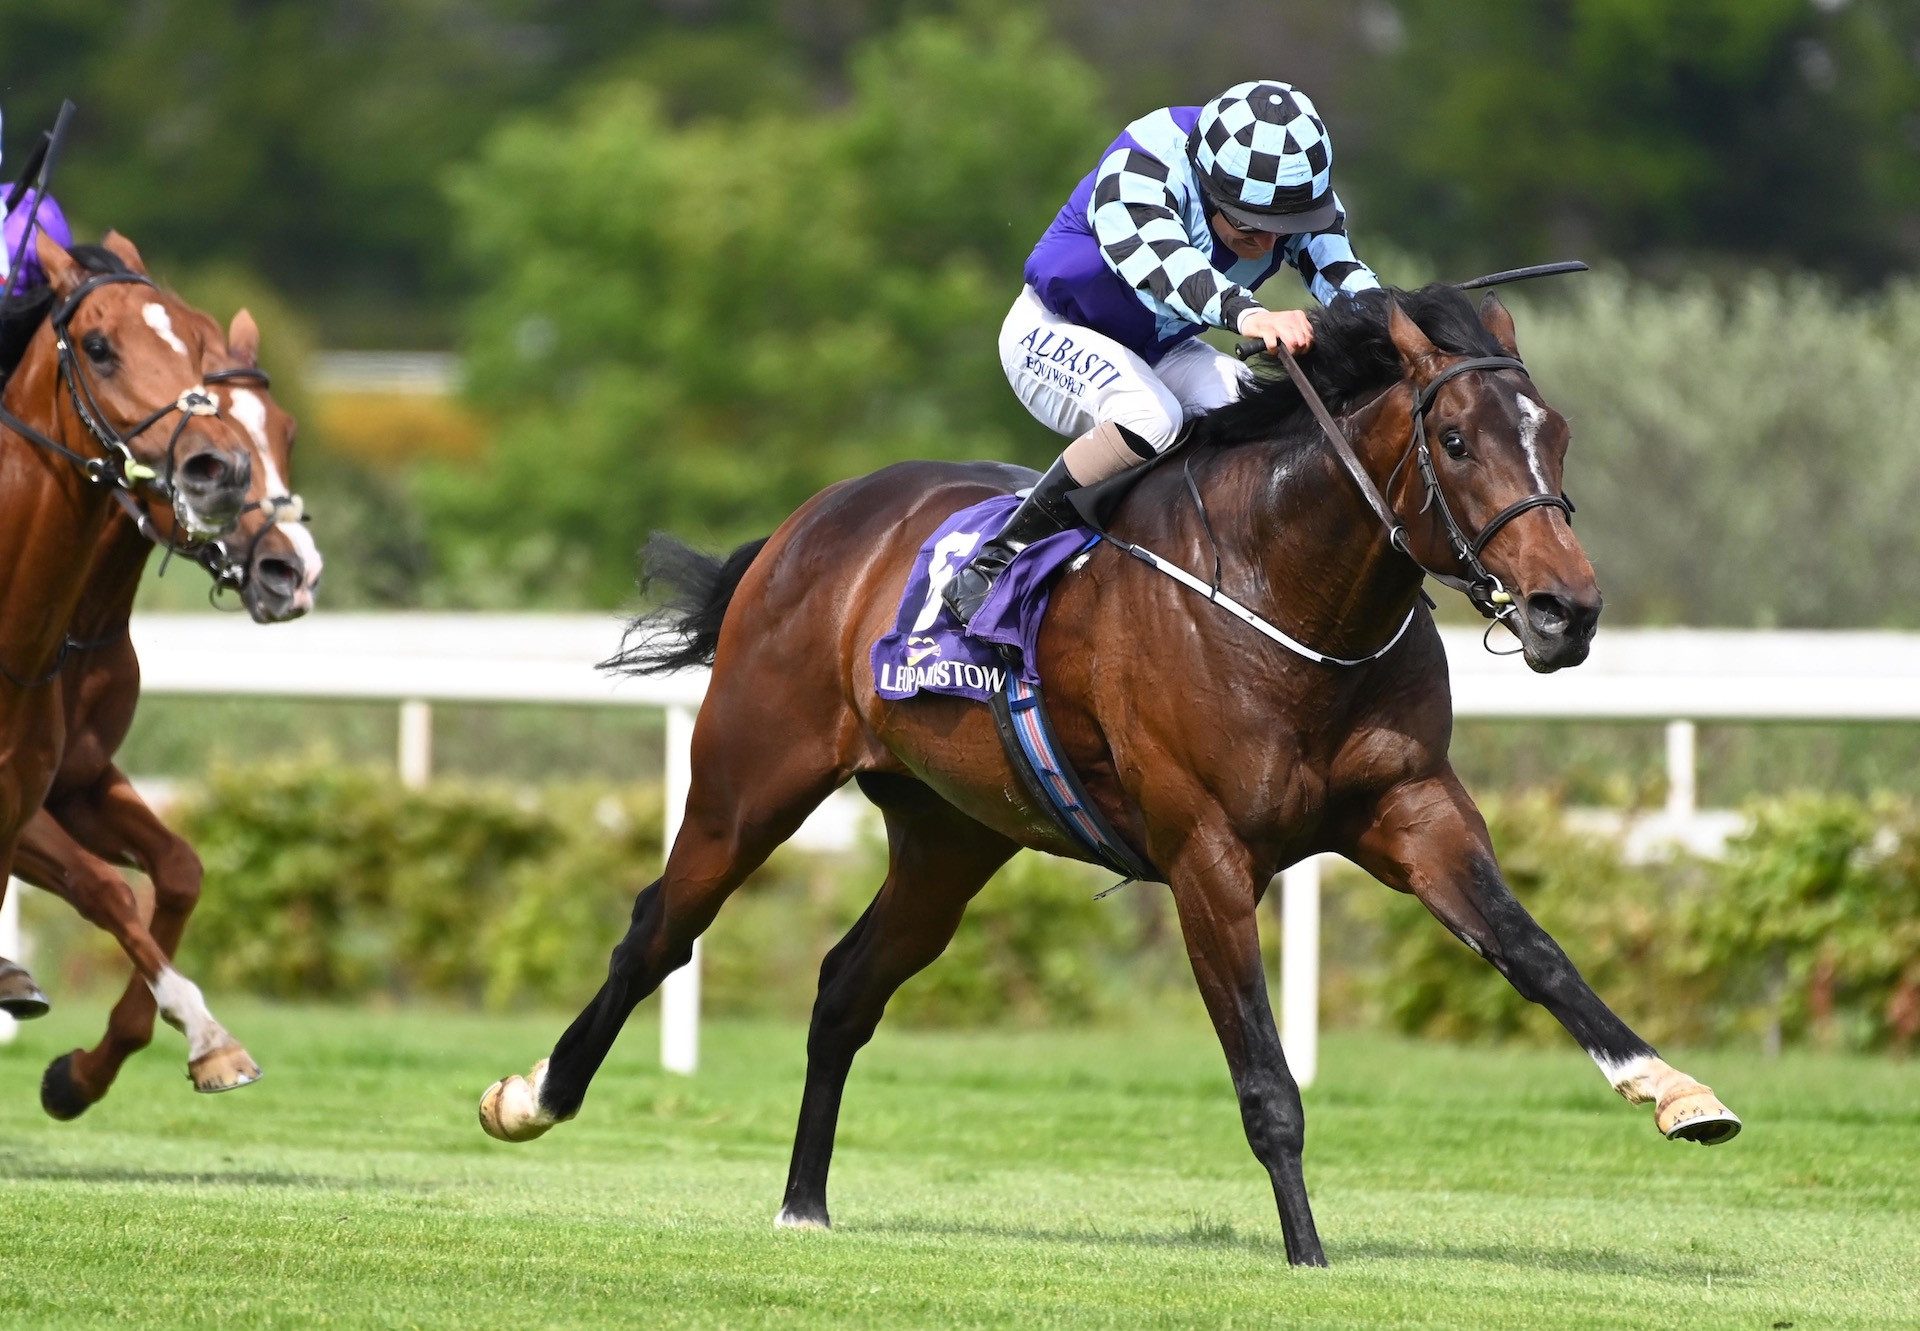 Sprewell (Churchill) Wins The Group 3 Derby Trial at Leopardstown